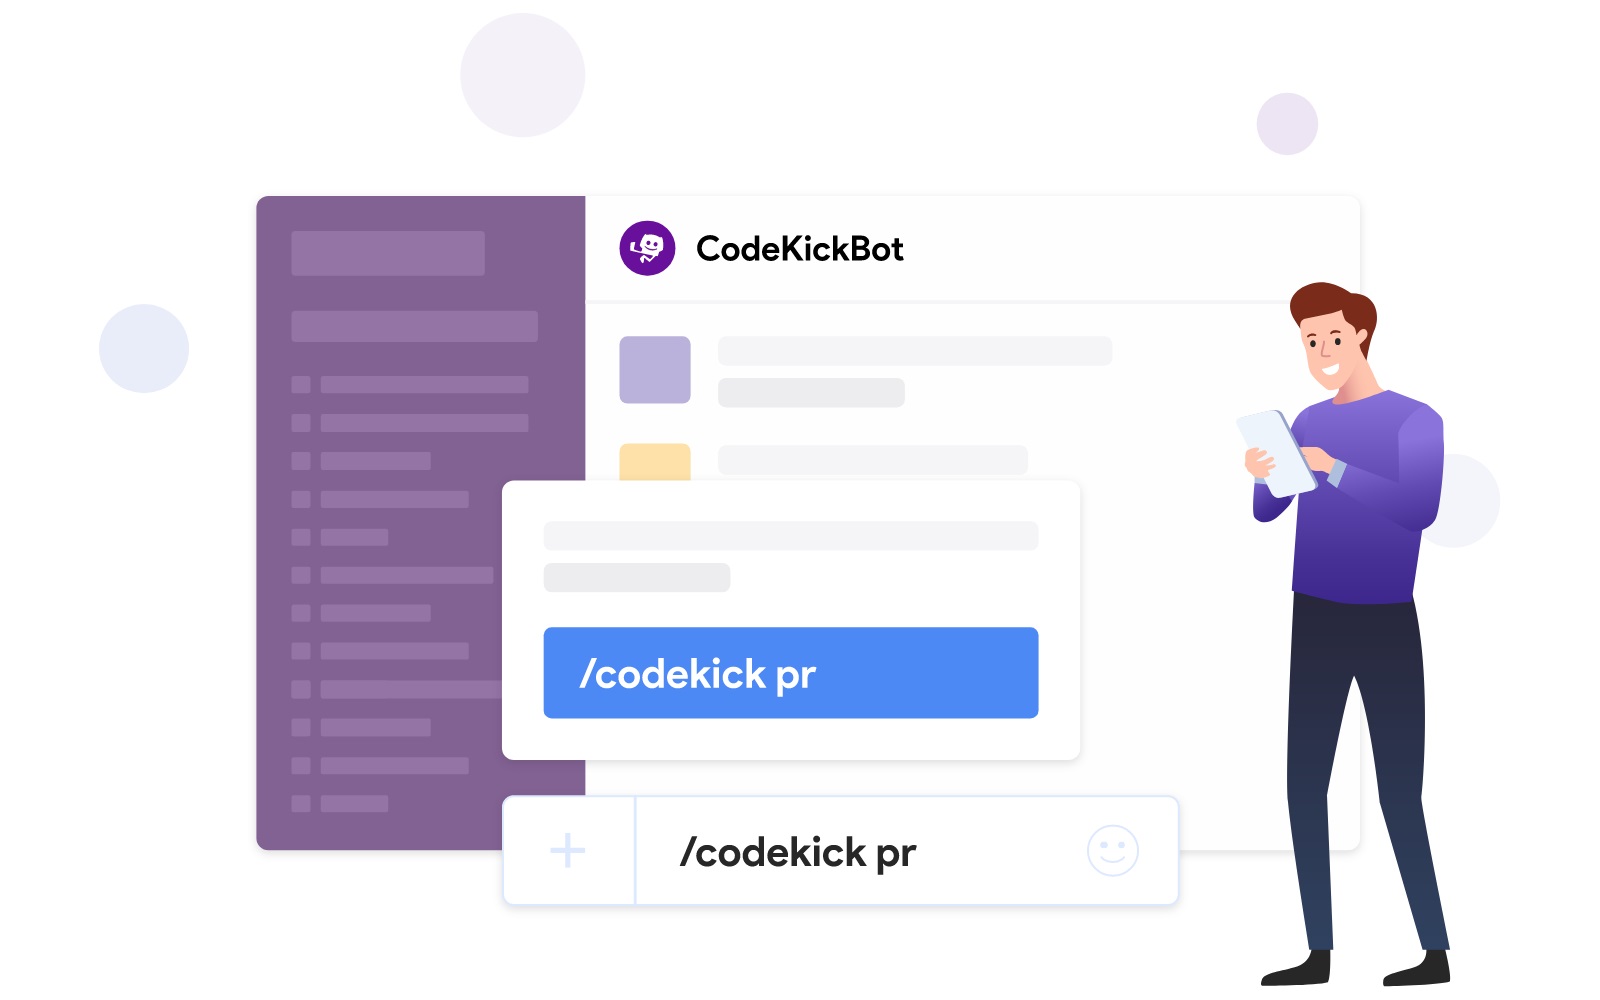 Find pricing, reviews and other details about CodeKickBot